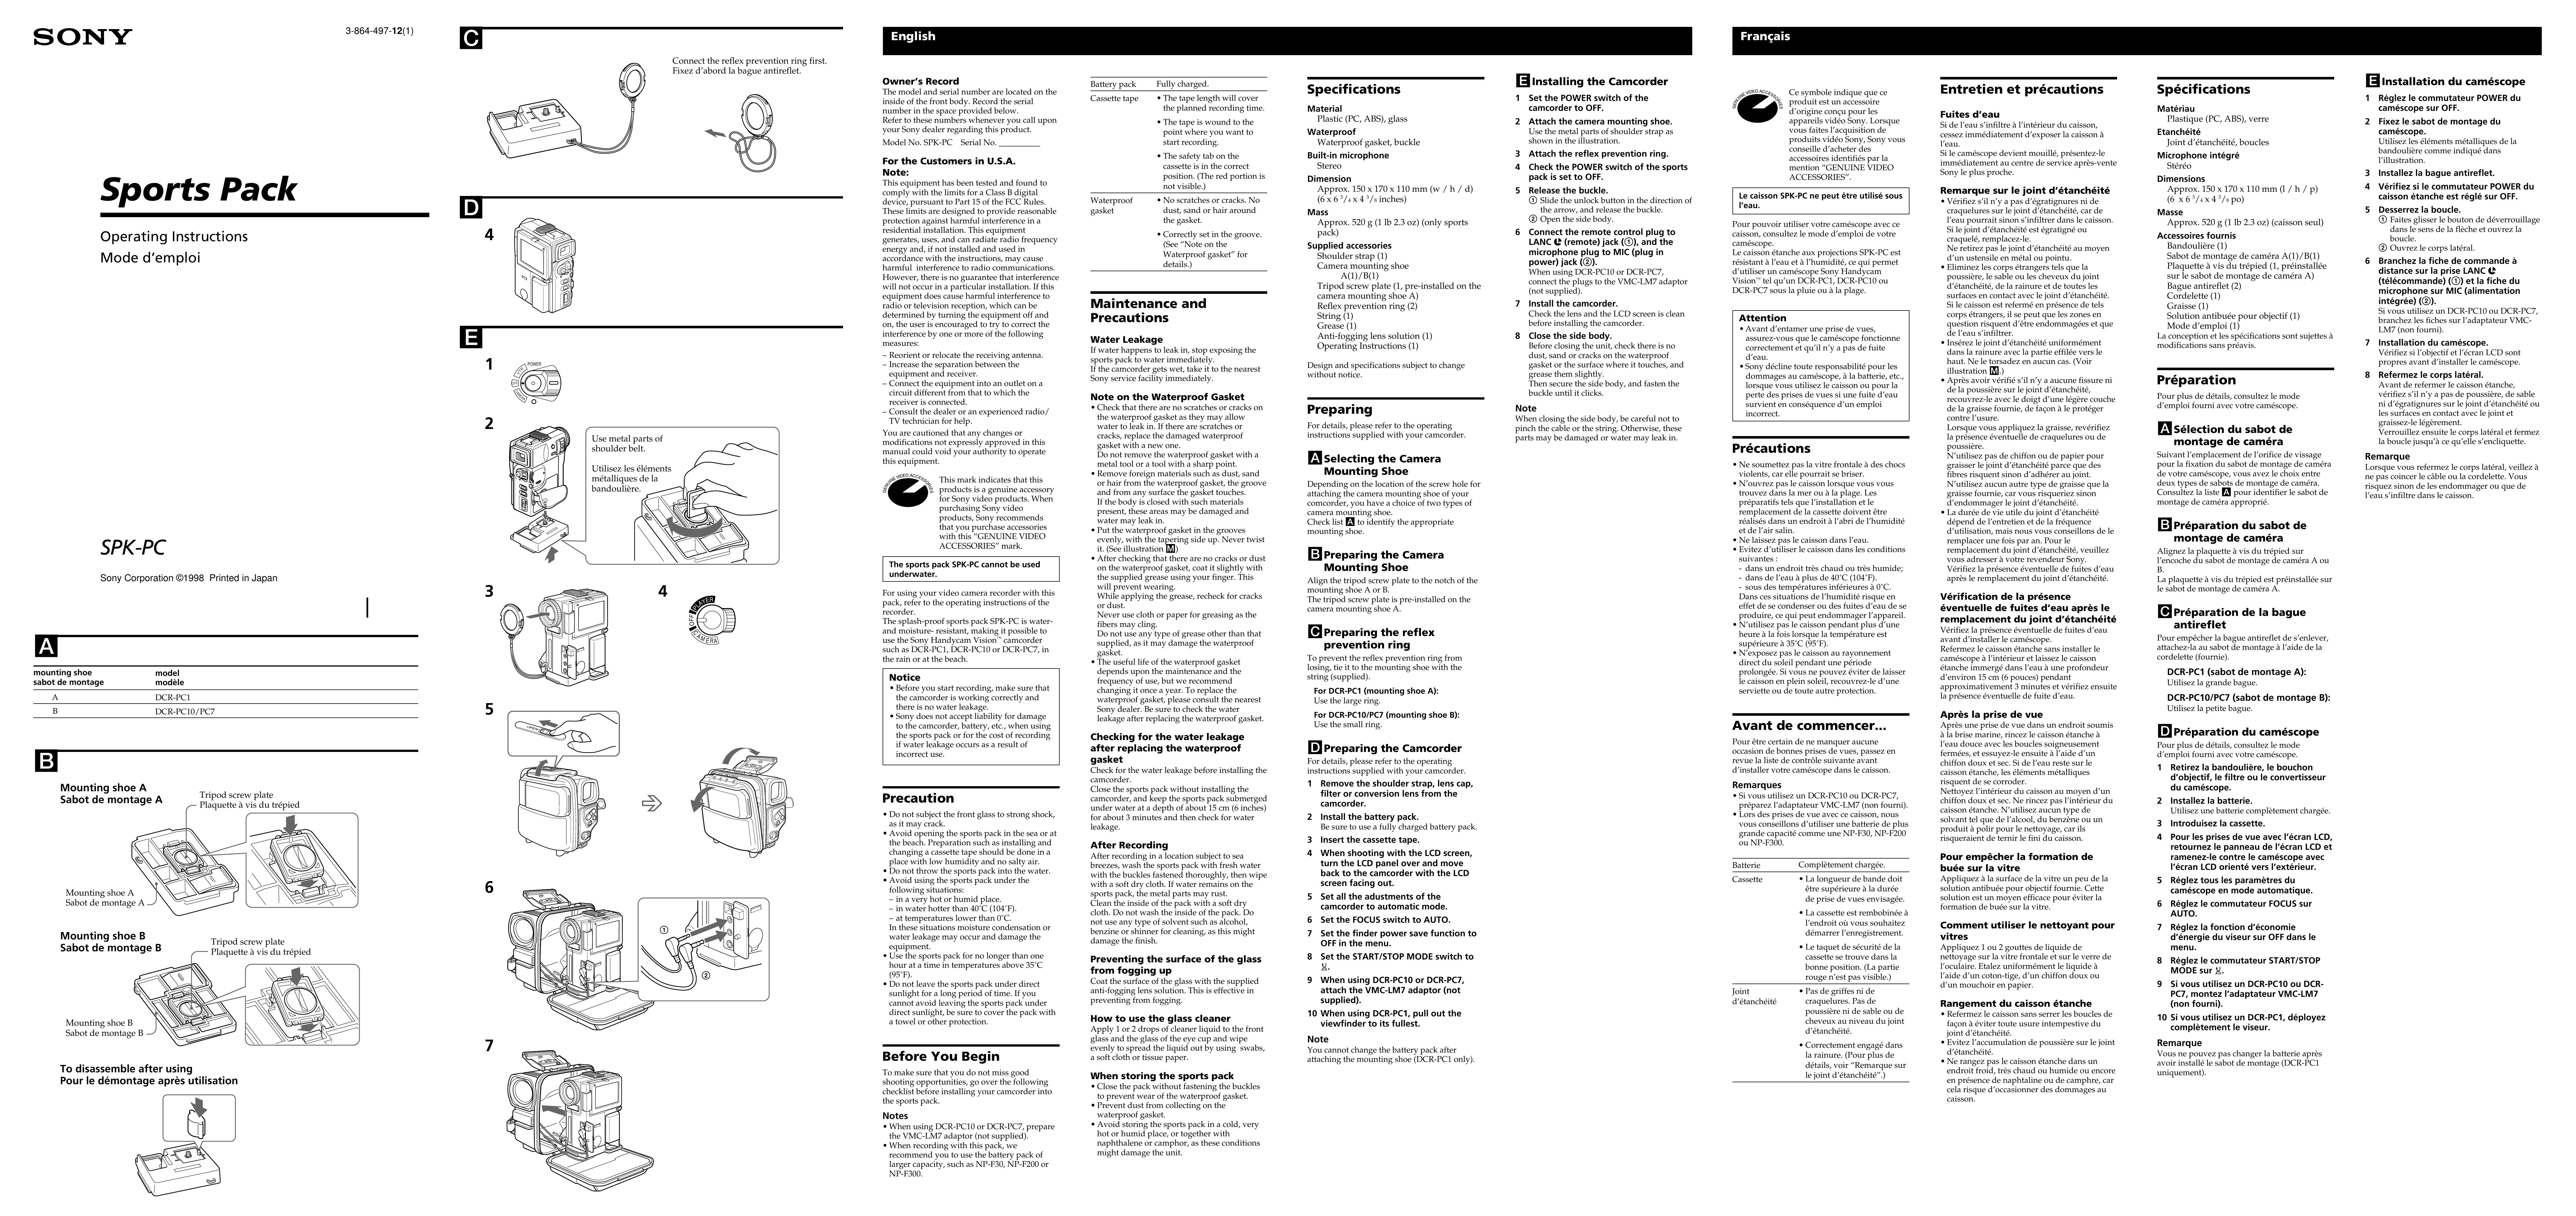 Sony SPK-PC Camcorder Accessories User Manual